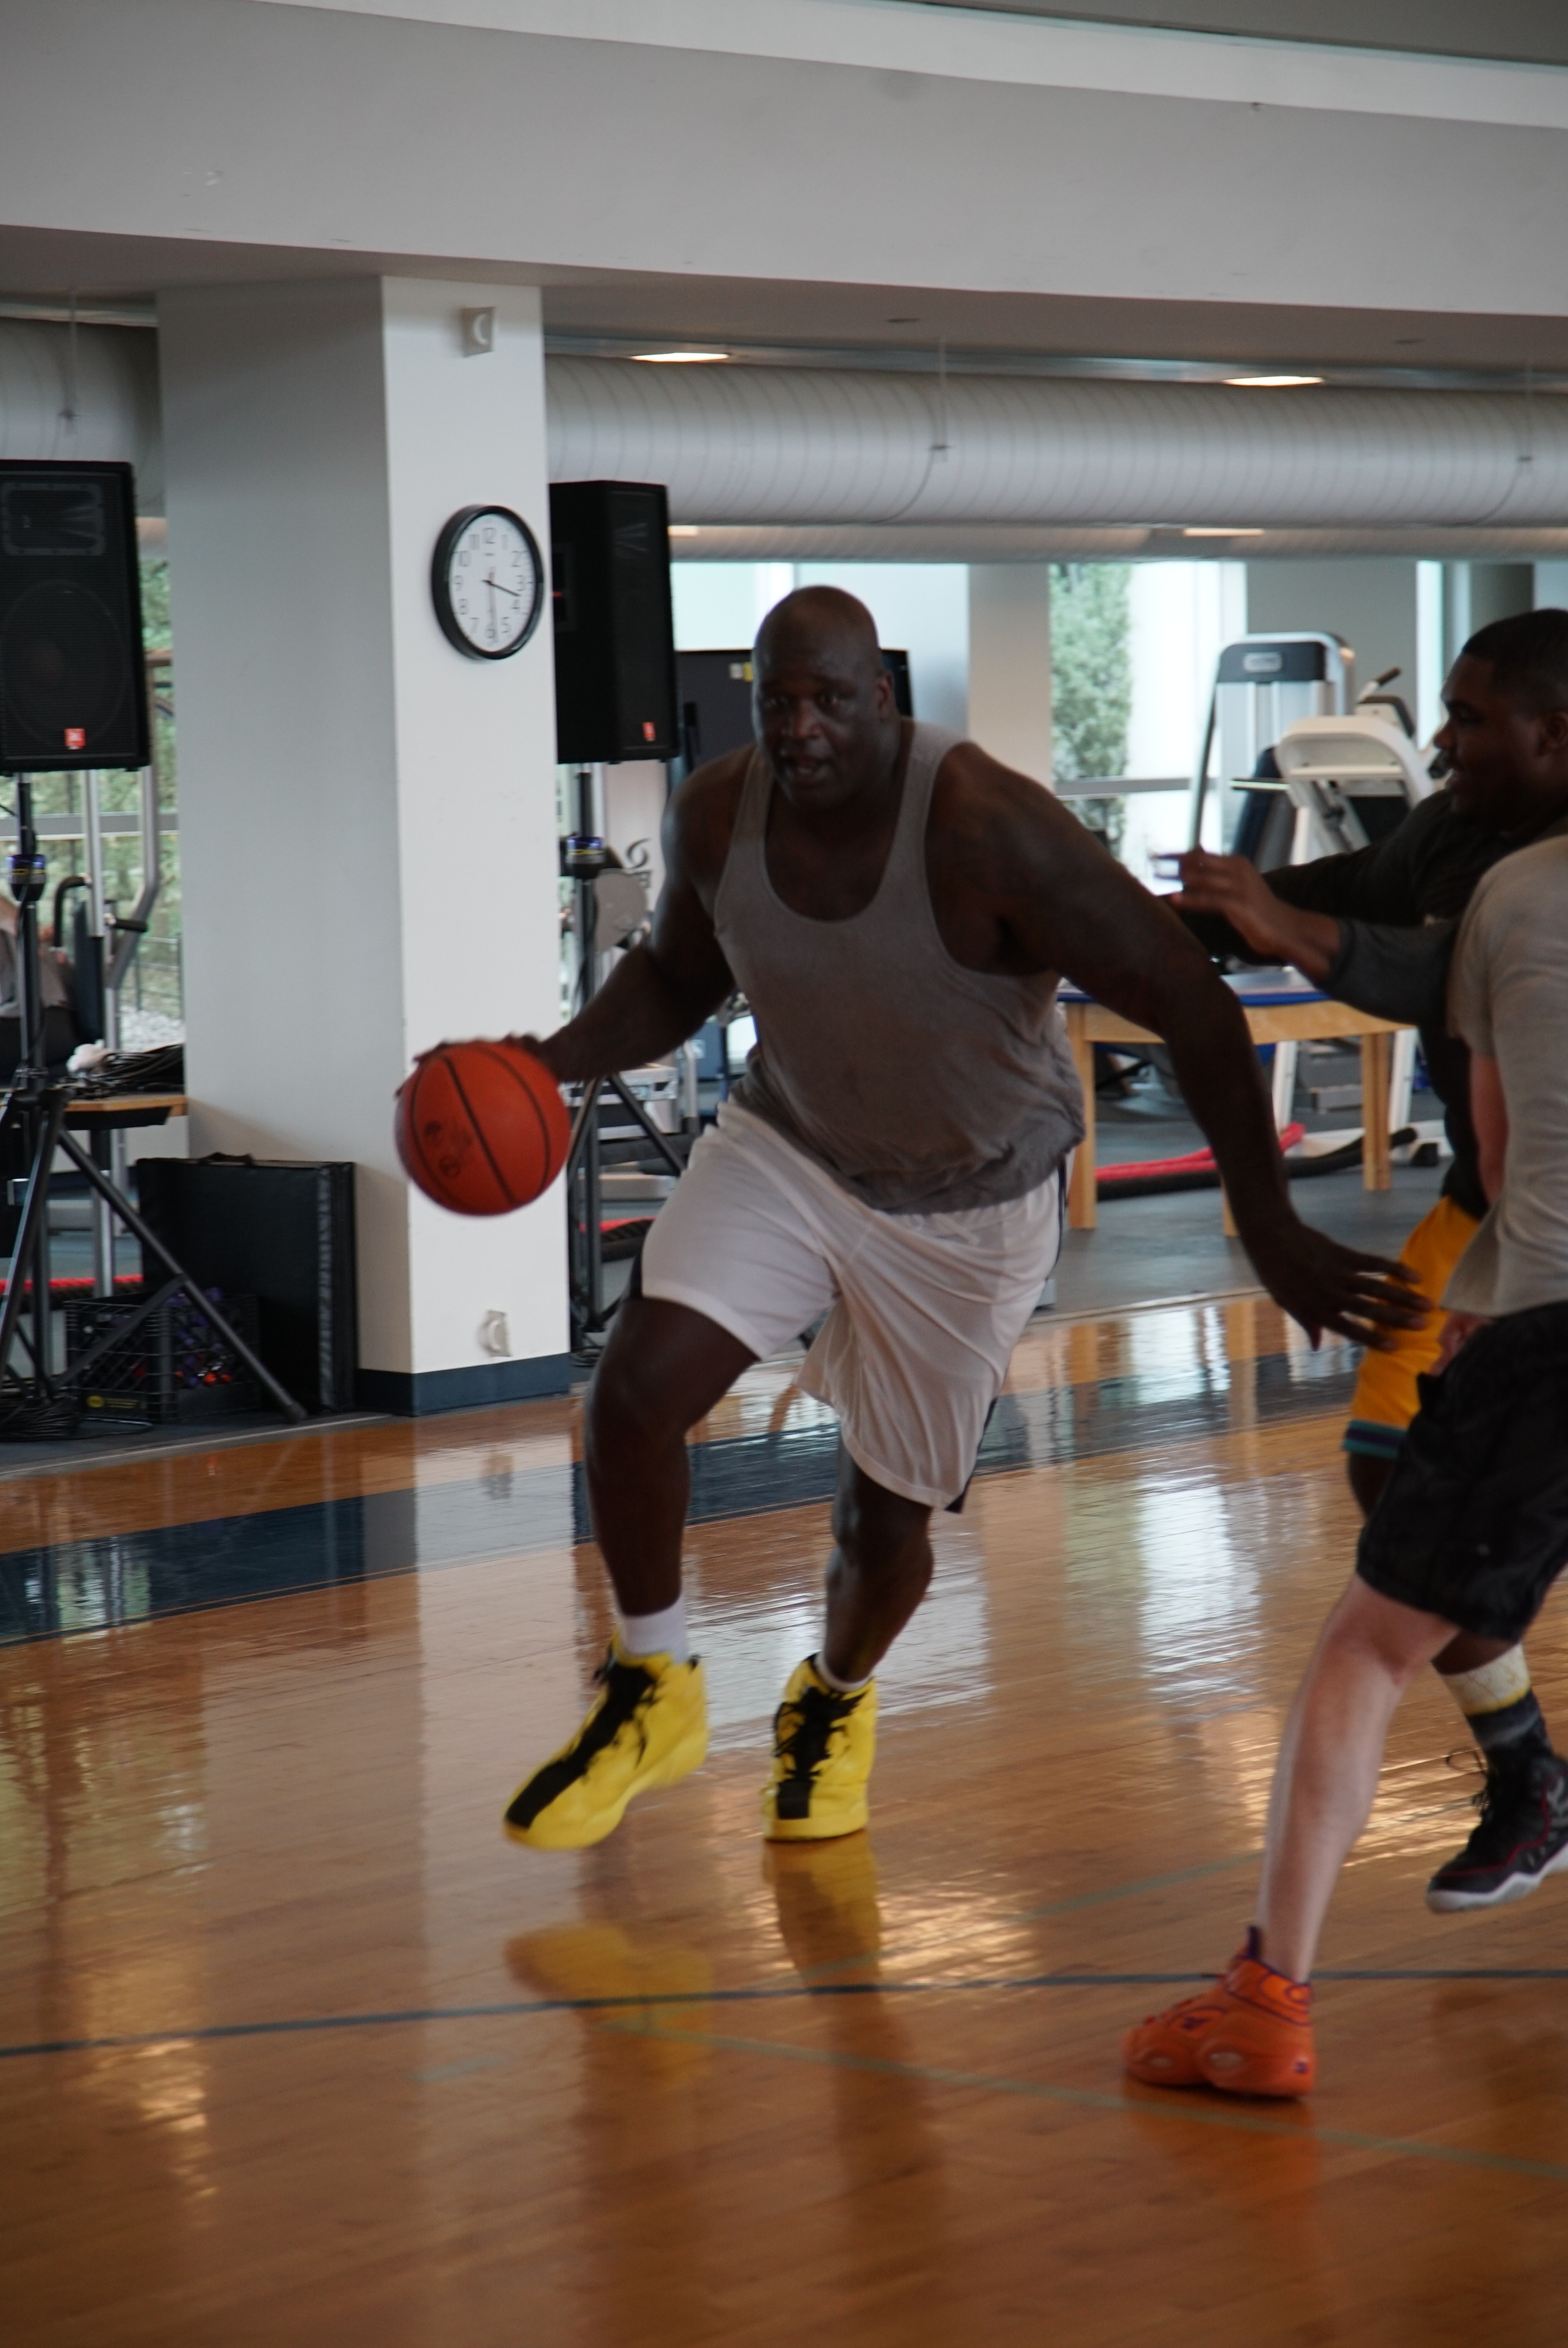 Reebok Presents Shaquille O'Neal in the new Shaq Attaq Modern's - Hardwood and Hollywood2832 x 4240